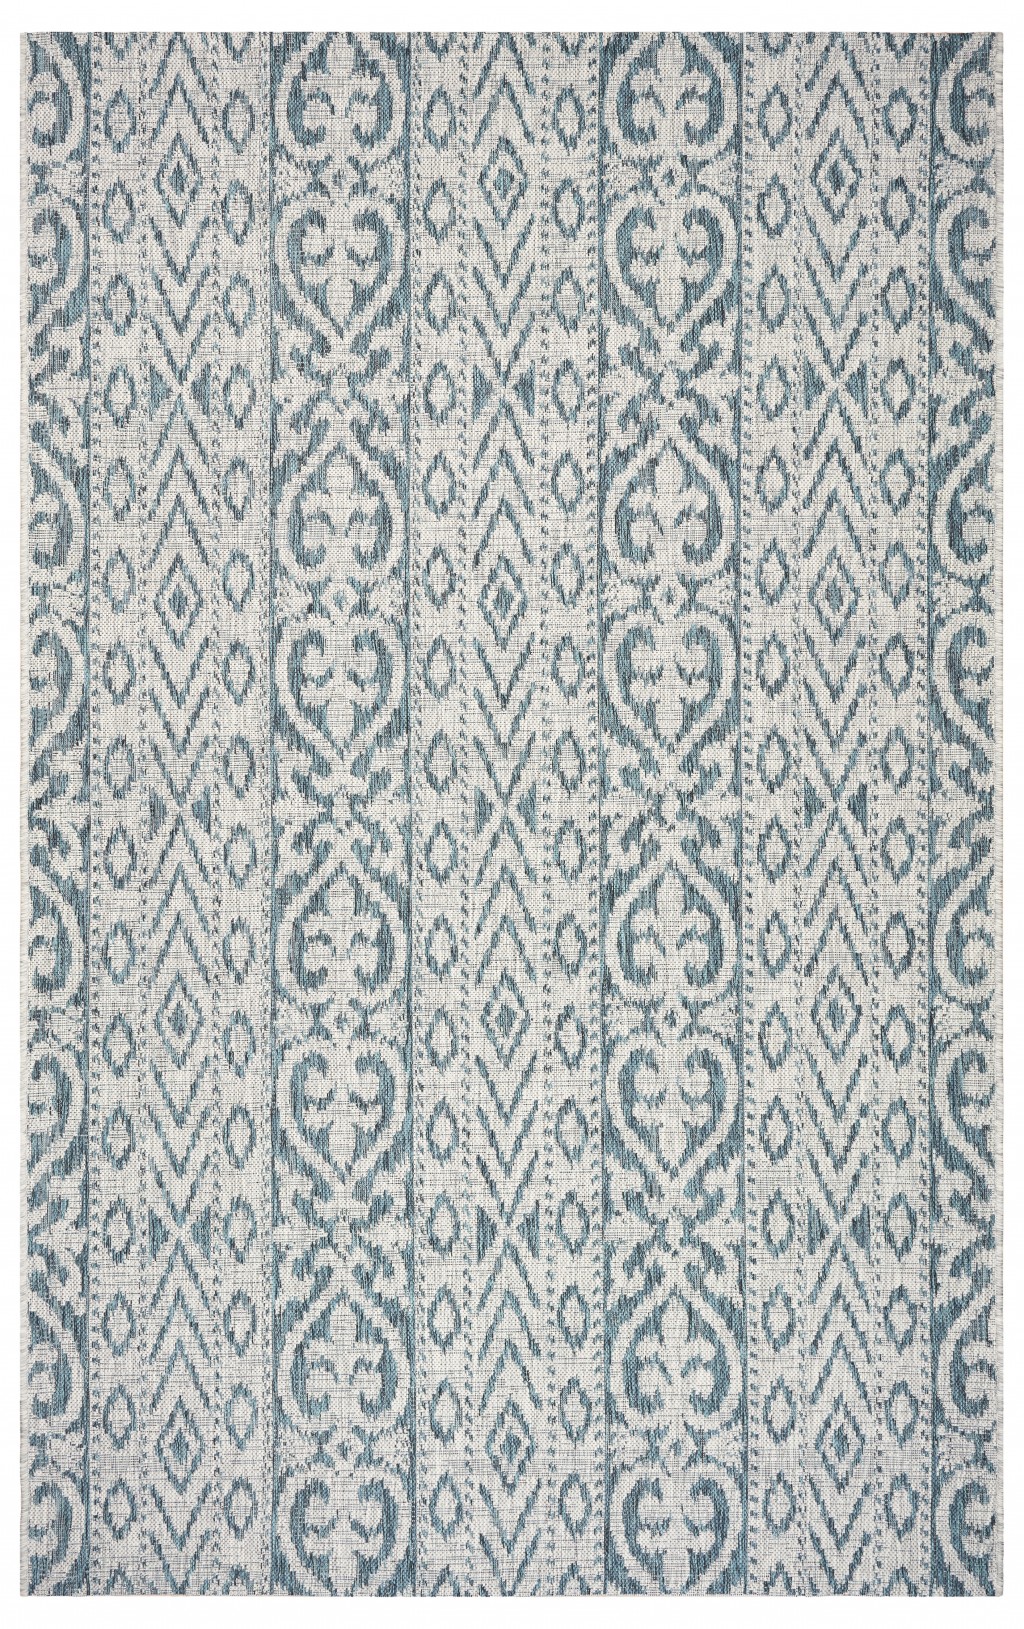 5' X 8' Blue And White Indoor Outdoor Area Rug-396223-1